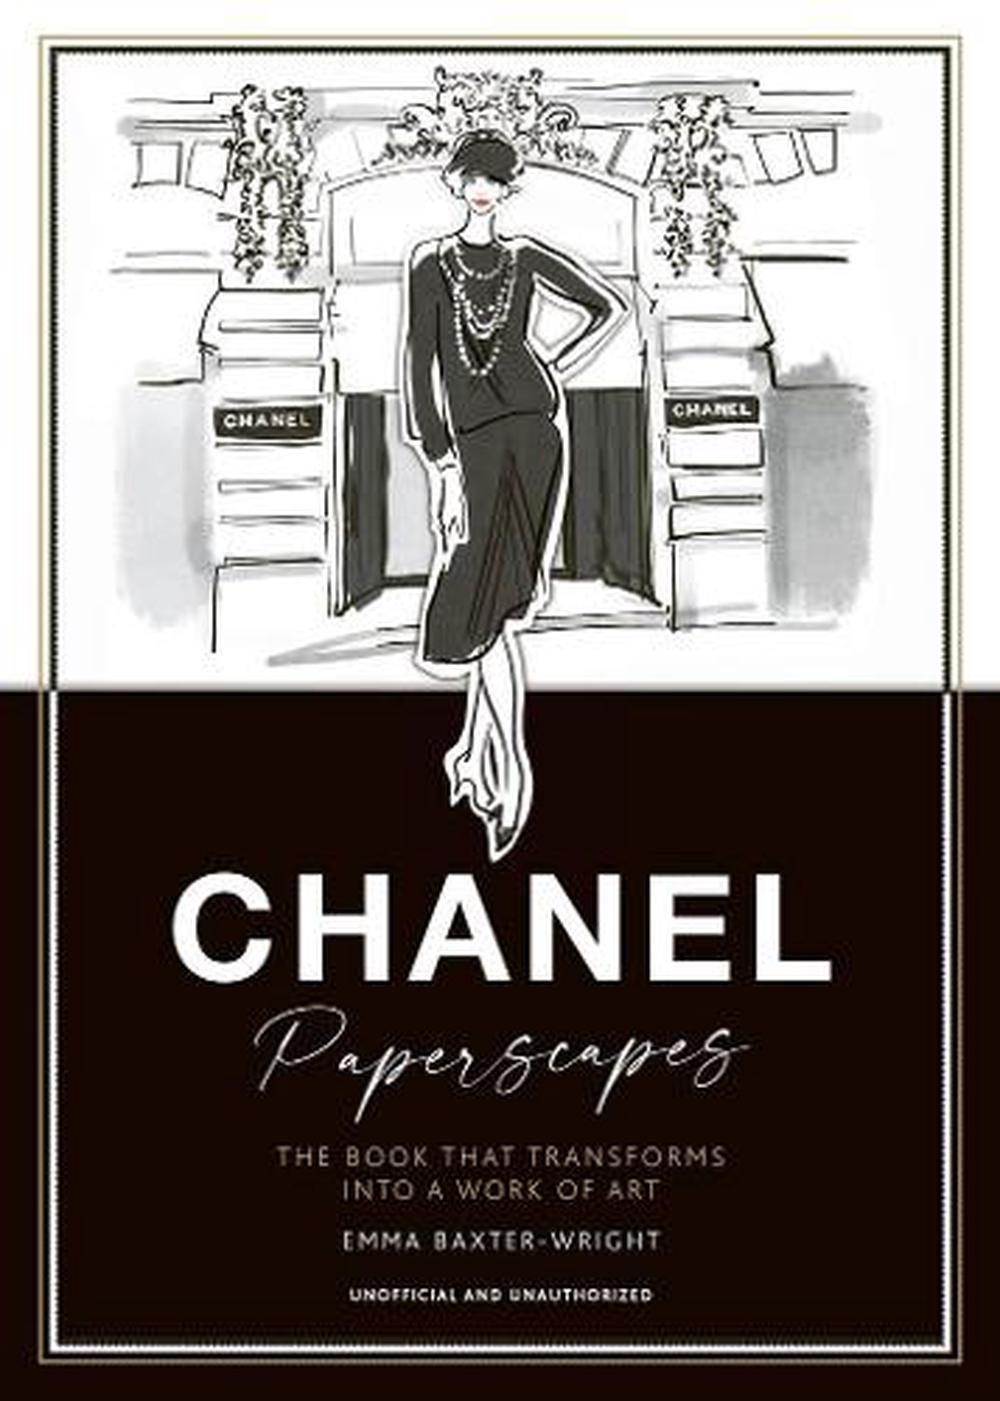 Chanel (Paperscapes) by Emma Baxter-wright, Hardcover, 9781787397446 | Buy  online at The Nile